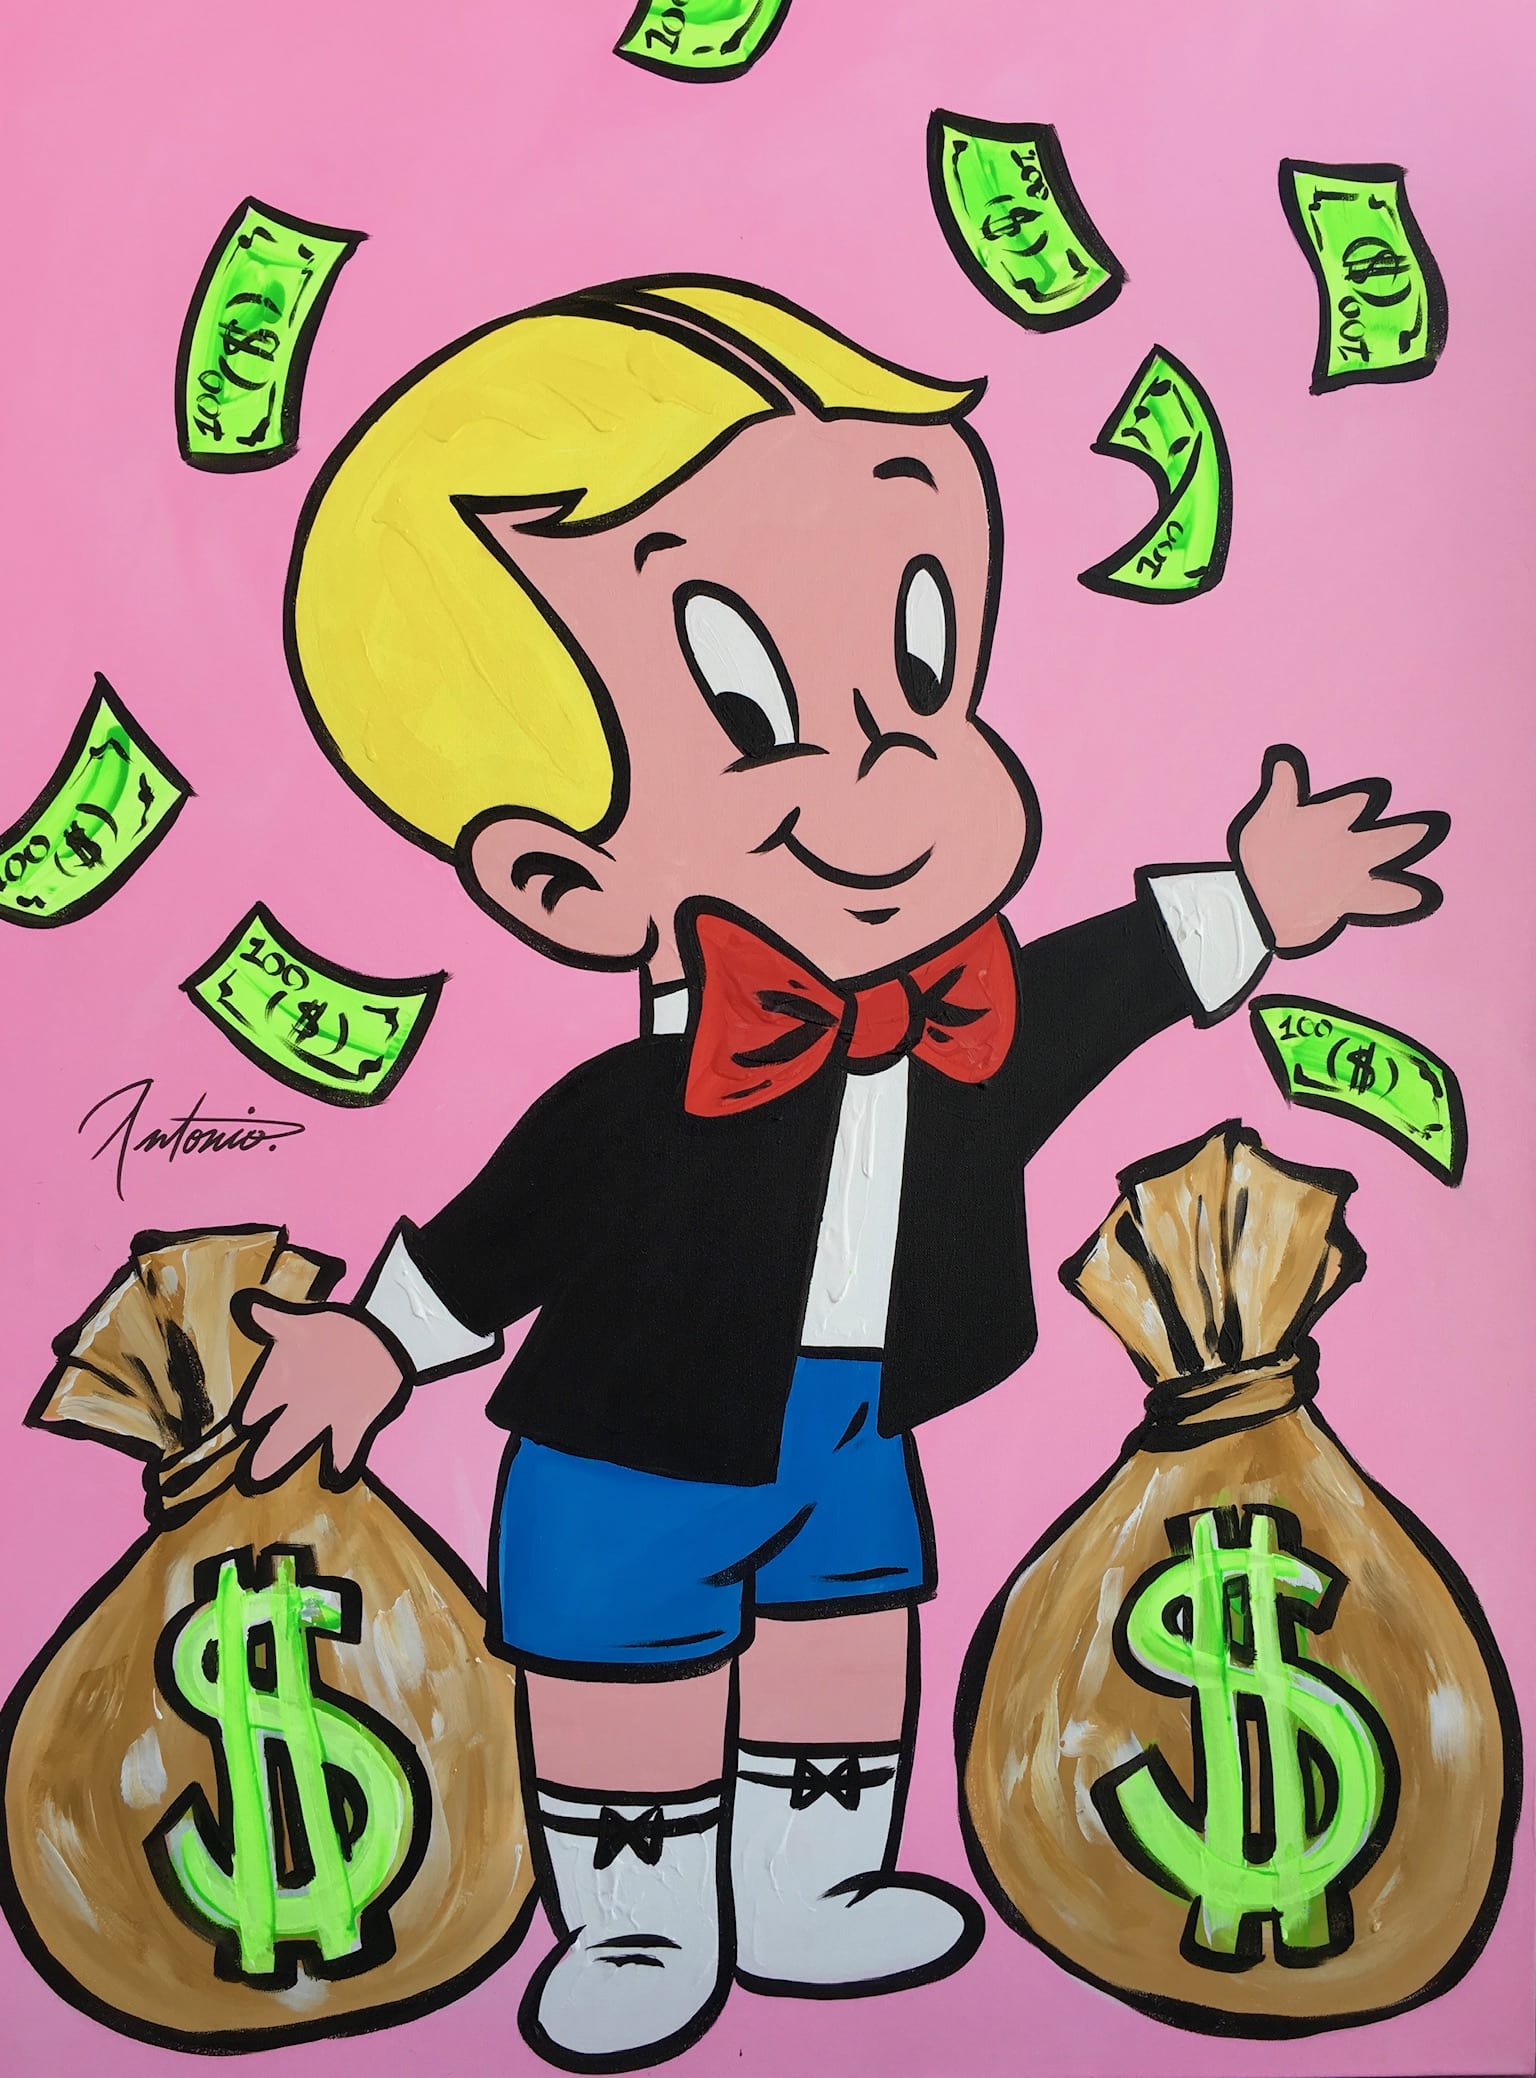 Richie Rich Wallpapers